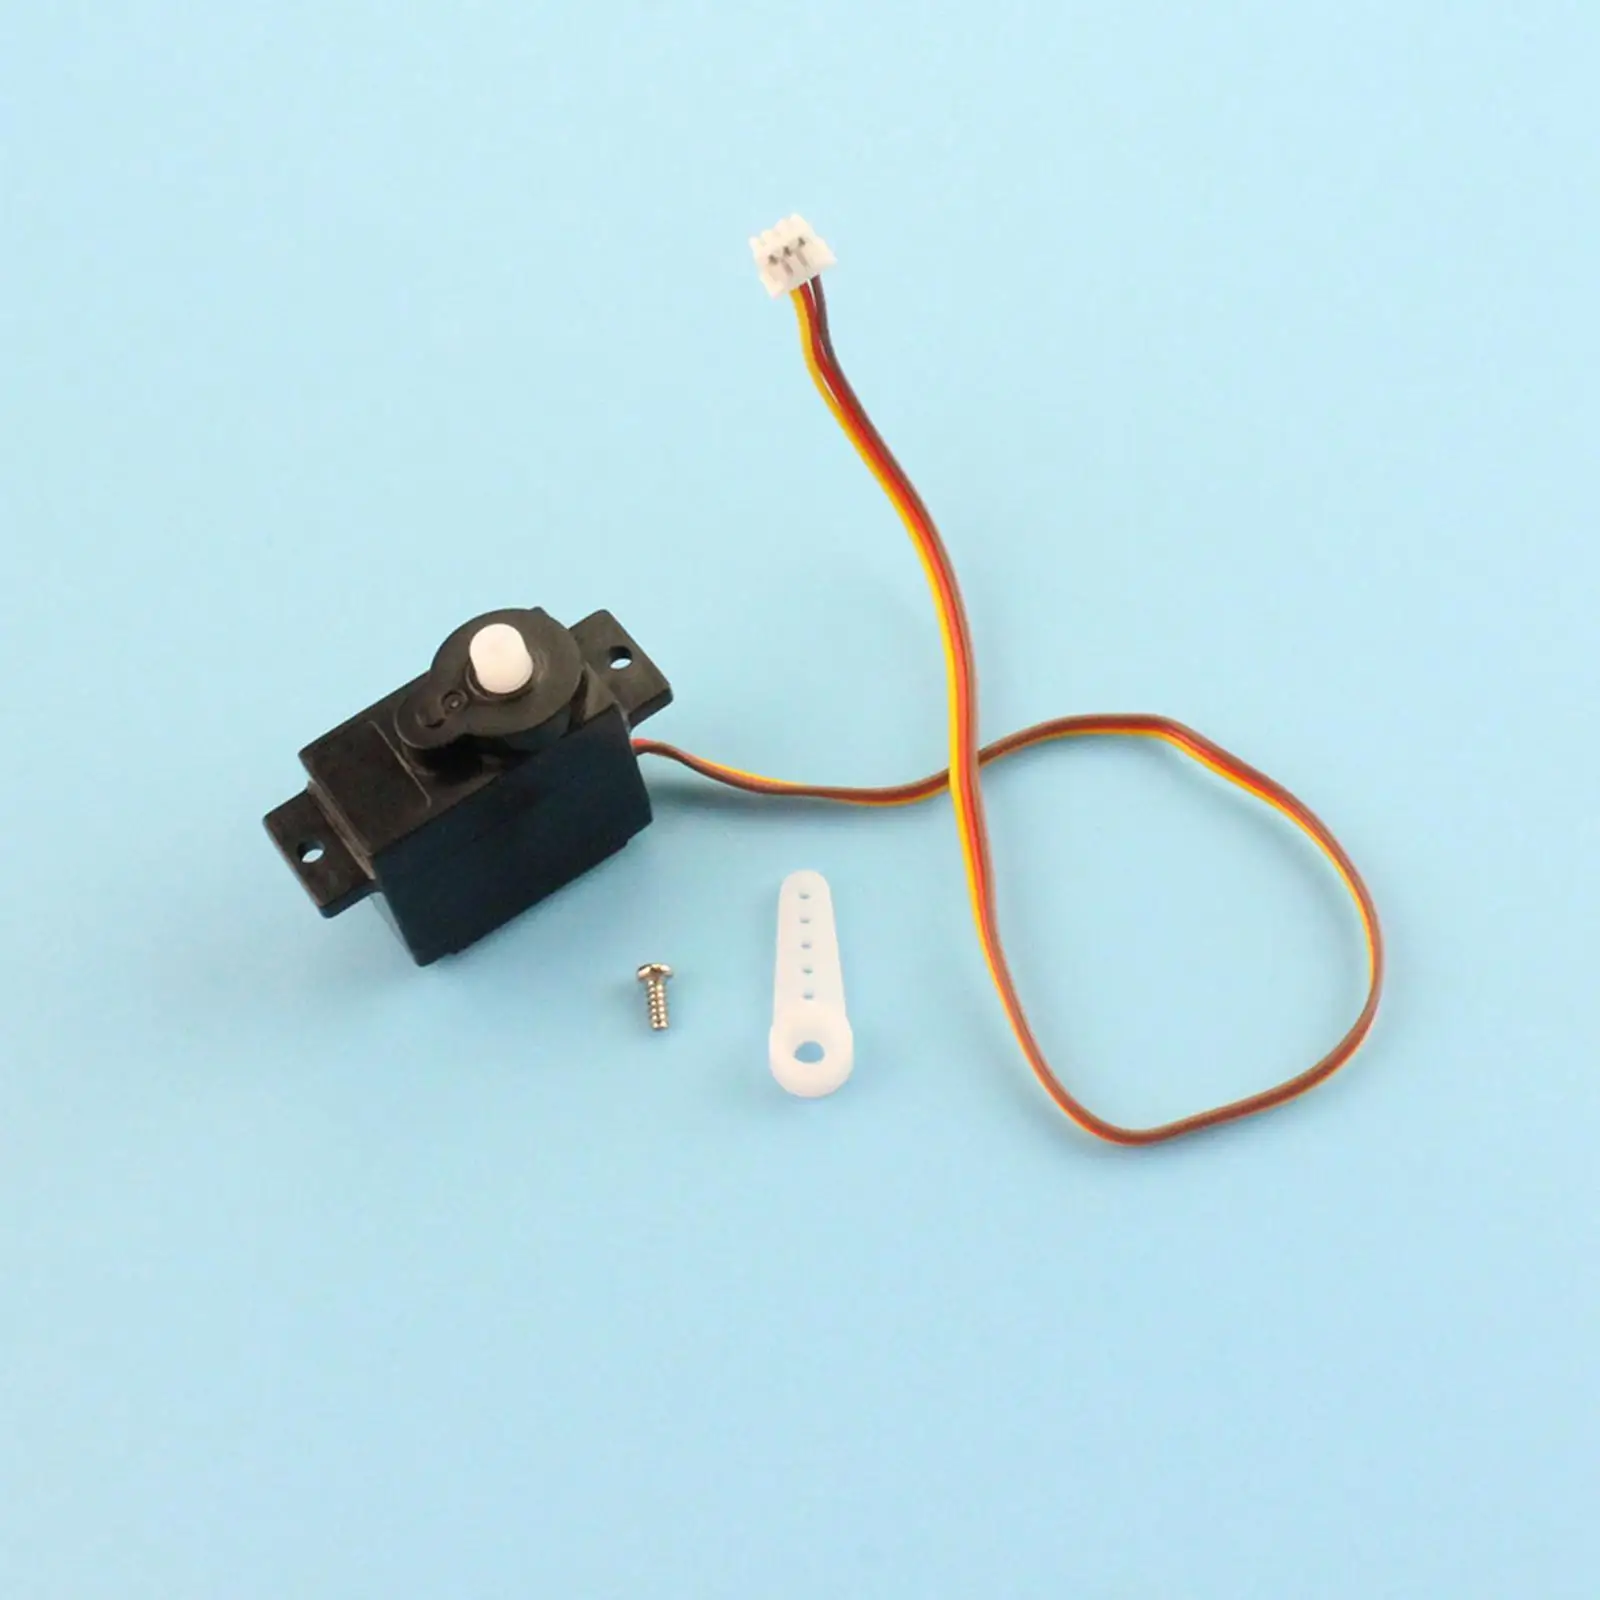 Waterproof RC Digital Servo with Steering Gear Arm and Screw for WL917-15 Boat RC Ship Accessories Parts